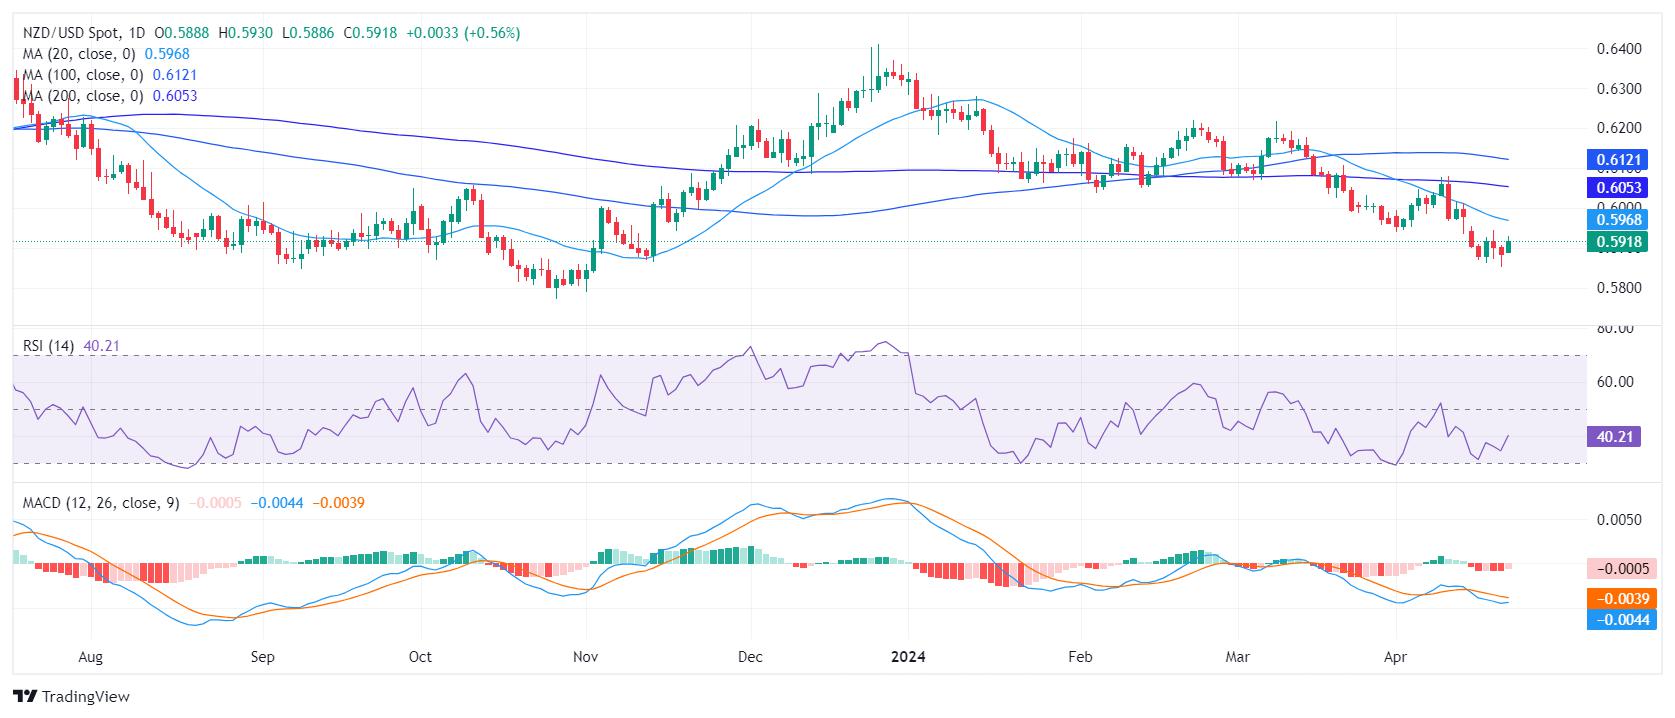 NZD/USD Price Analysis: Bears hold sway, subtle signs of potential bullish reversal emerging